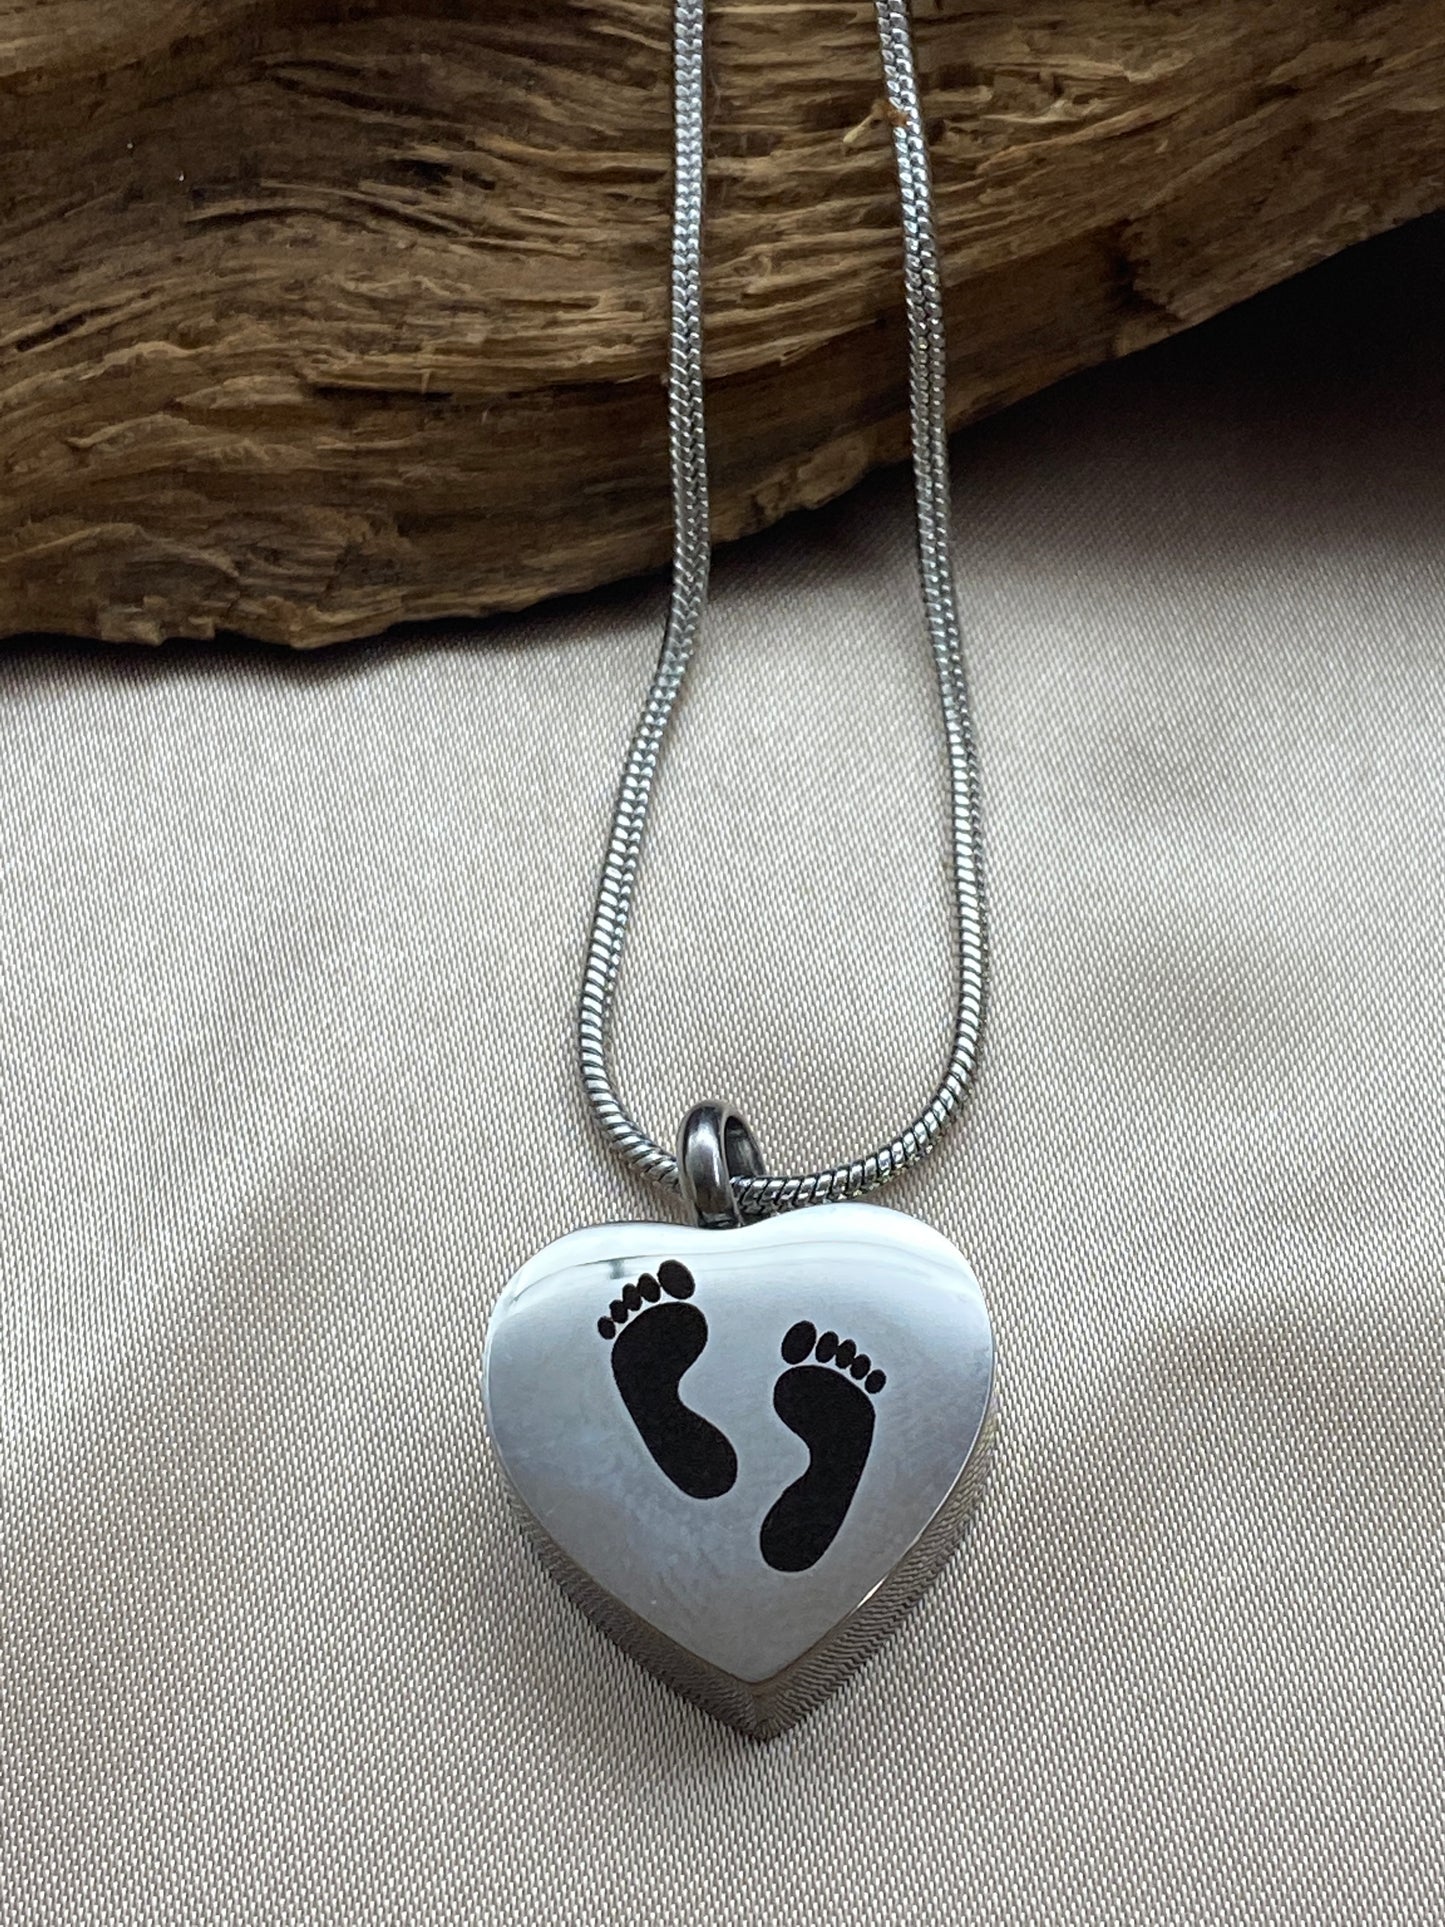 Heartfelt Tribute - Cremation Memorial Heart Urn Necklace for Baby Ashes with Baby Feet Engraved. An Enduring Remembrance of Precious Little Ones